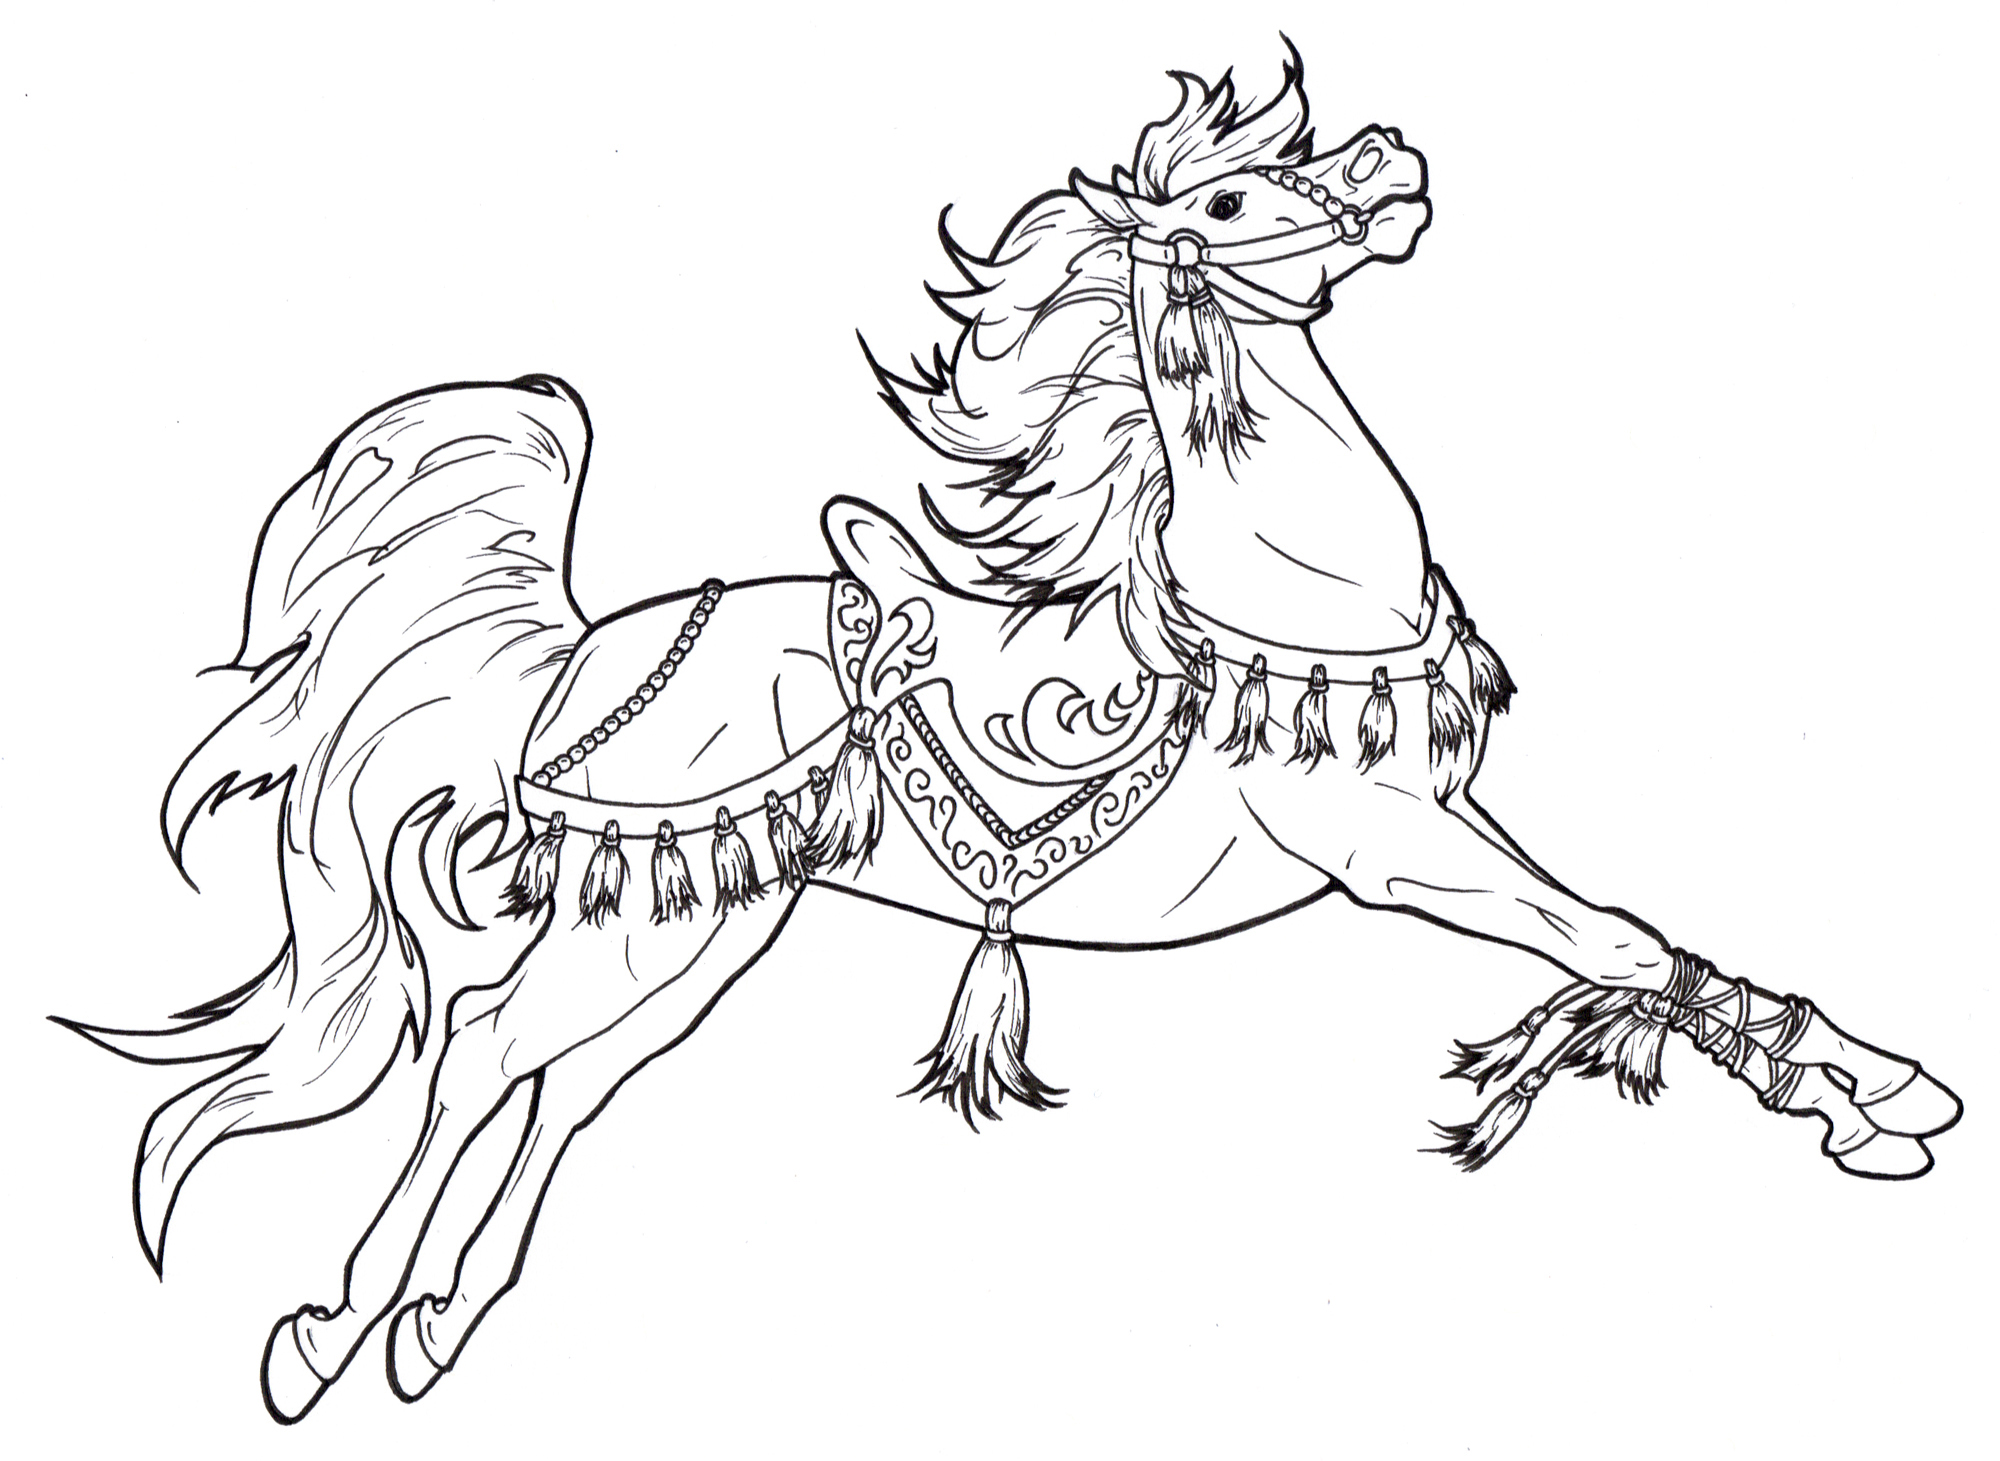 Animal Horse Coloring Pages To Print for Adult